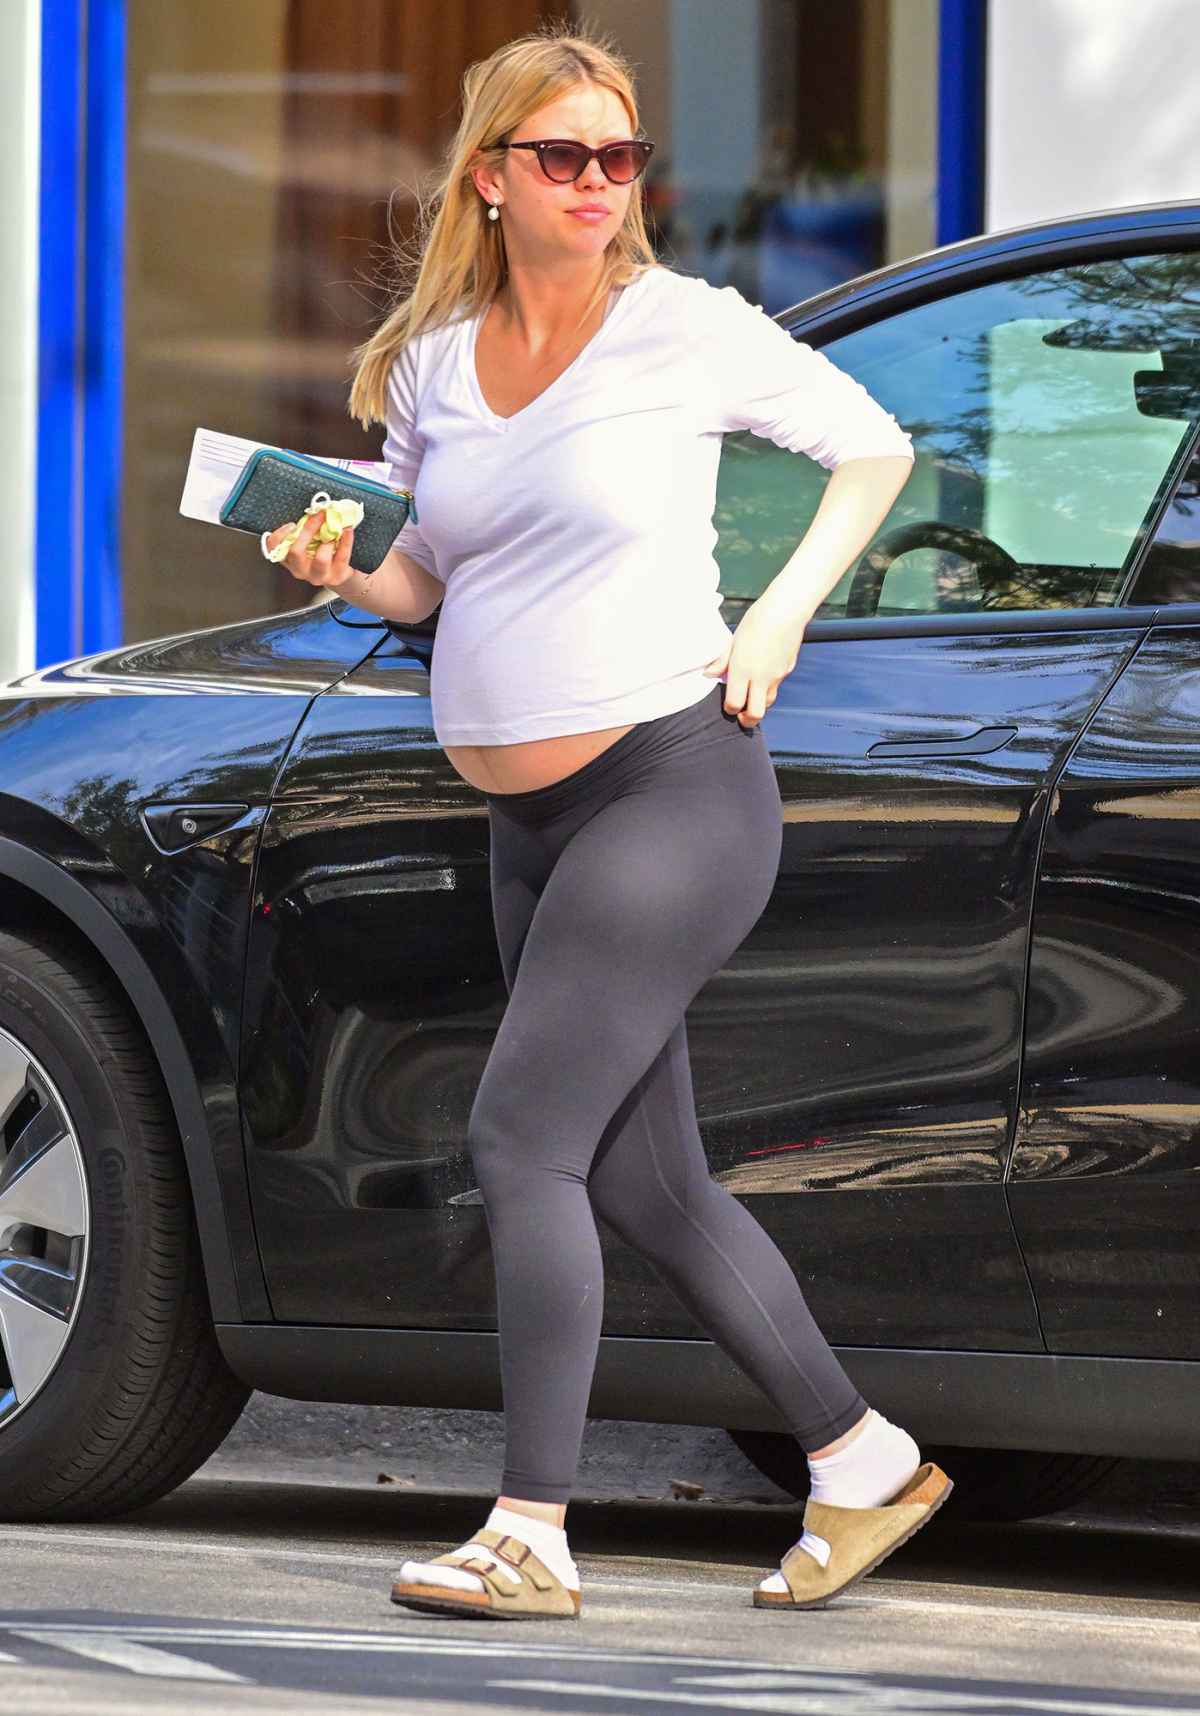 Pregnant Babe Nude Tights - Pregnant Celebrities Showing Baby Bumps in 2022: Photos